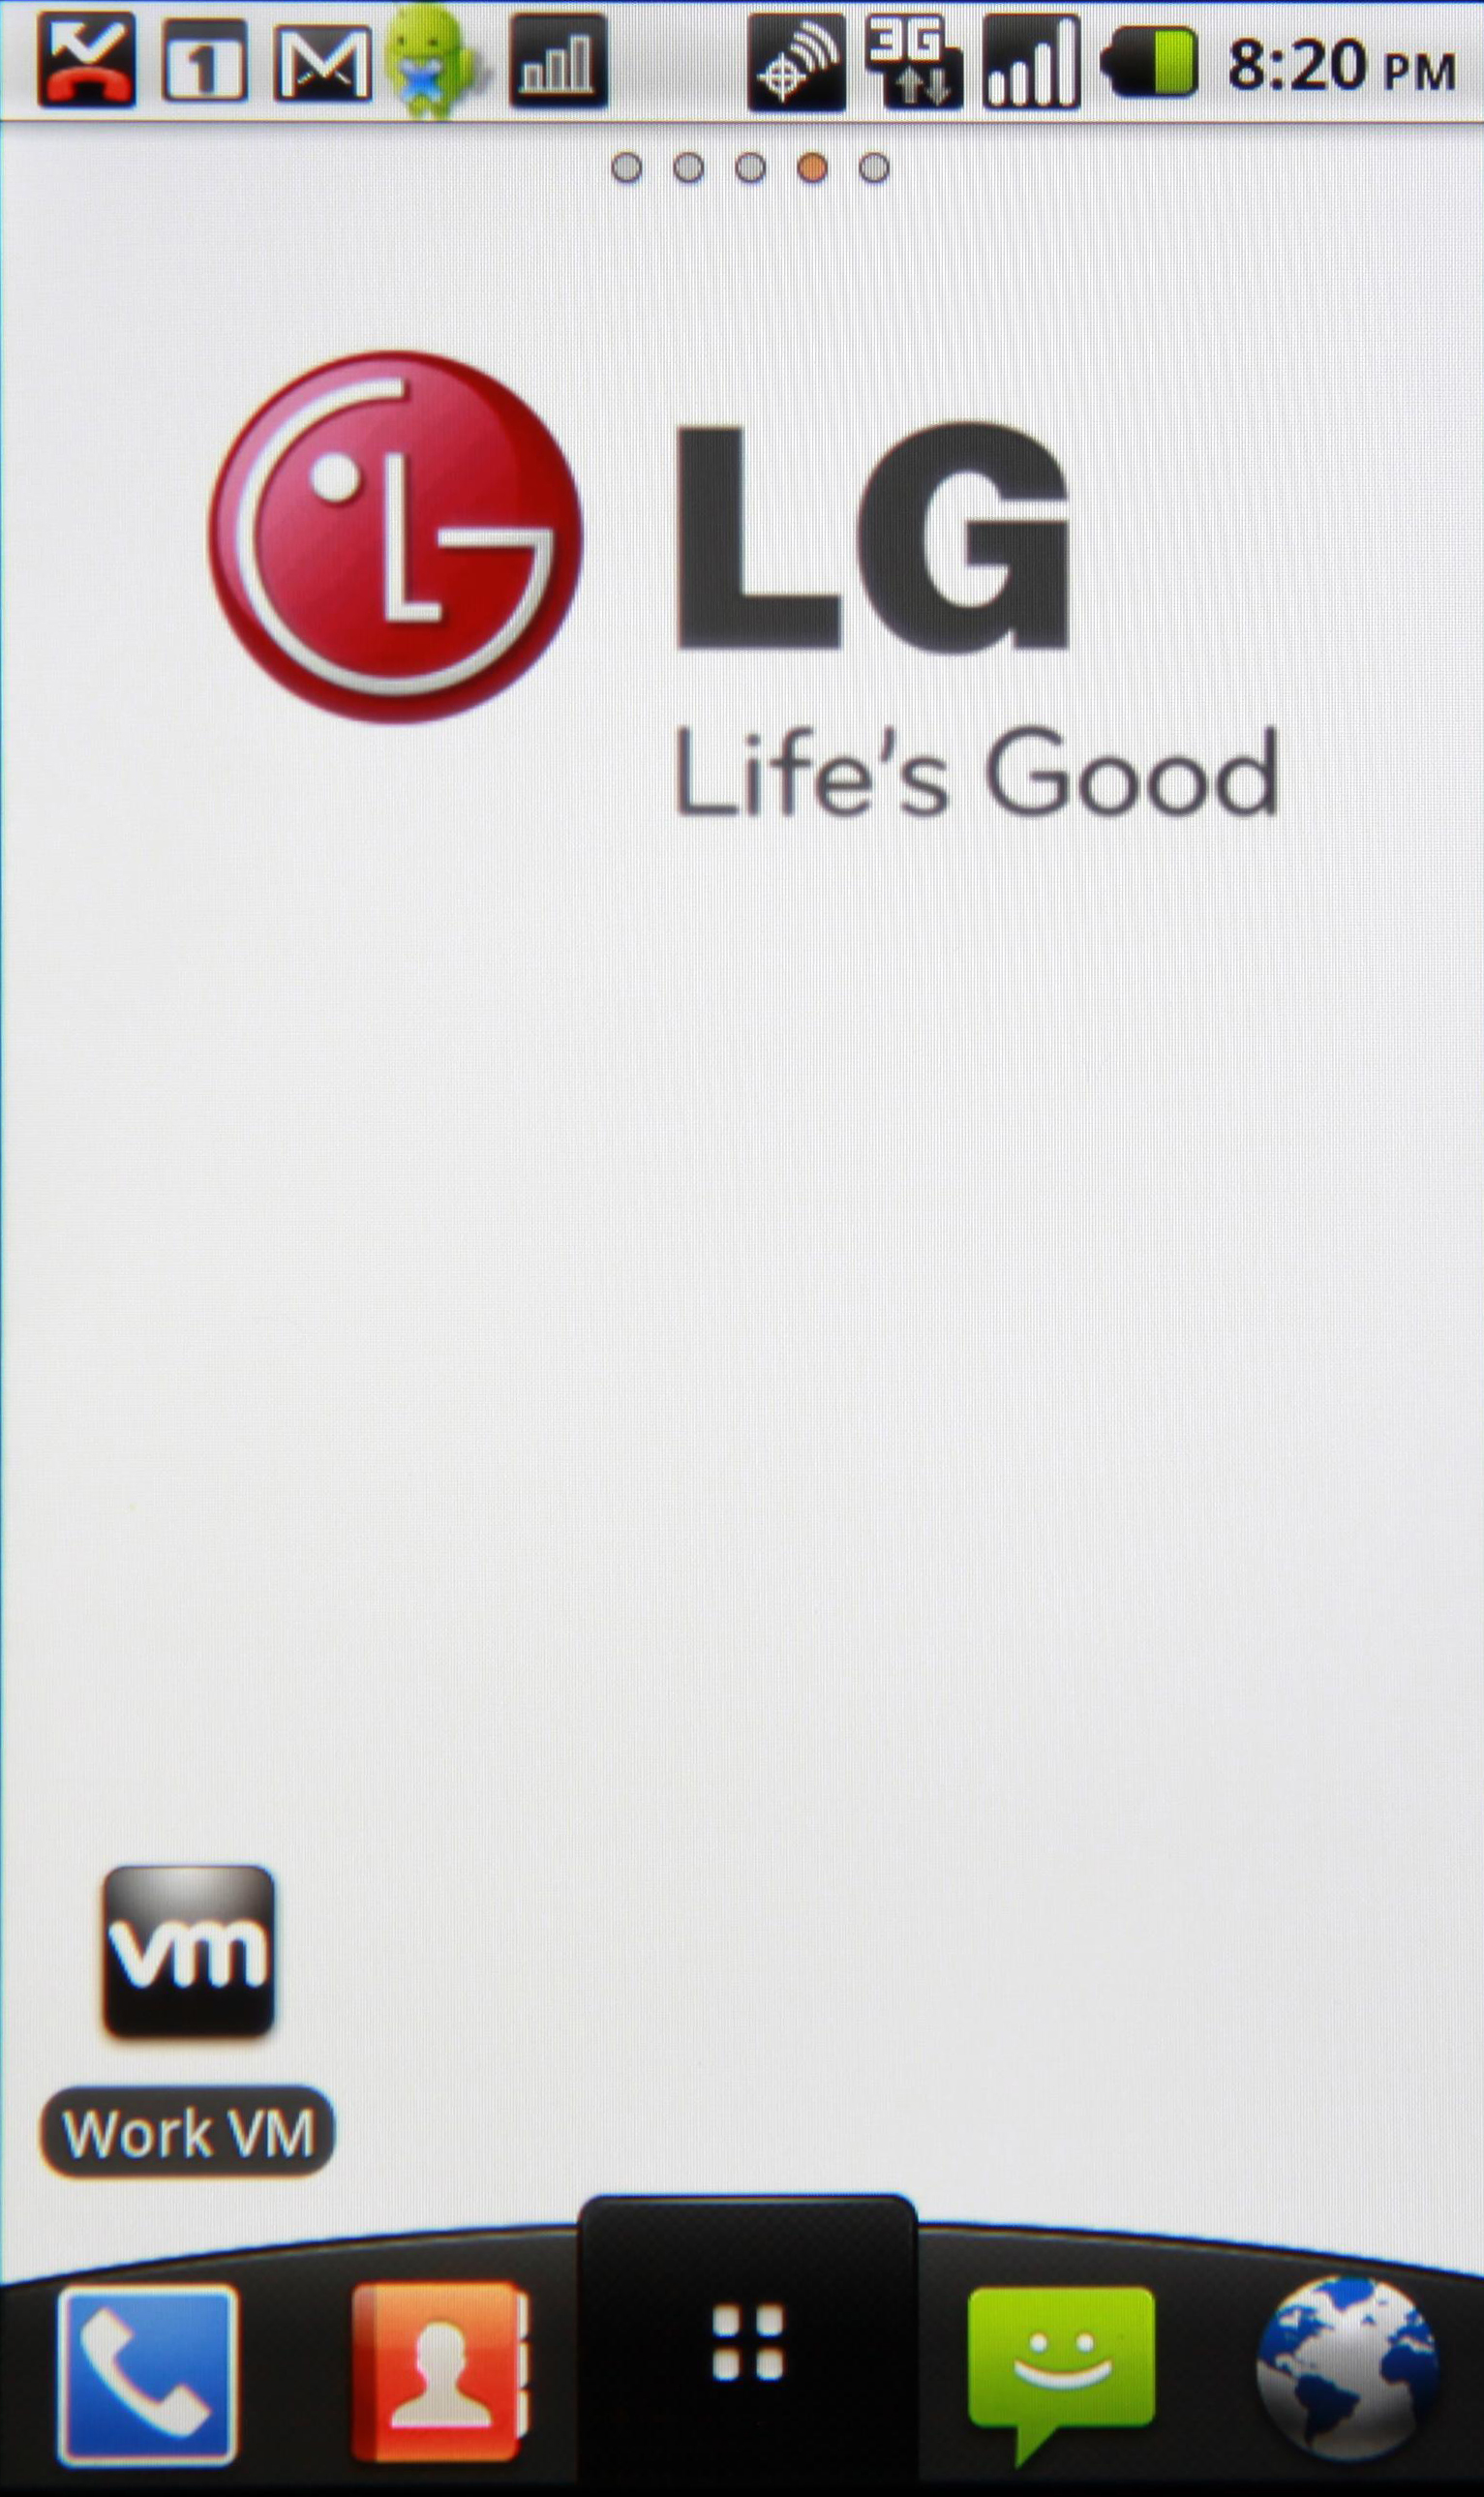 LG AND VMWARE JOIN FORCES TO ACCELERATE ENTERPRISE ADOPTION OF EMPLOY